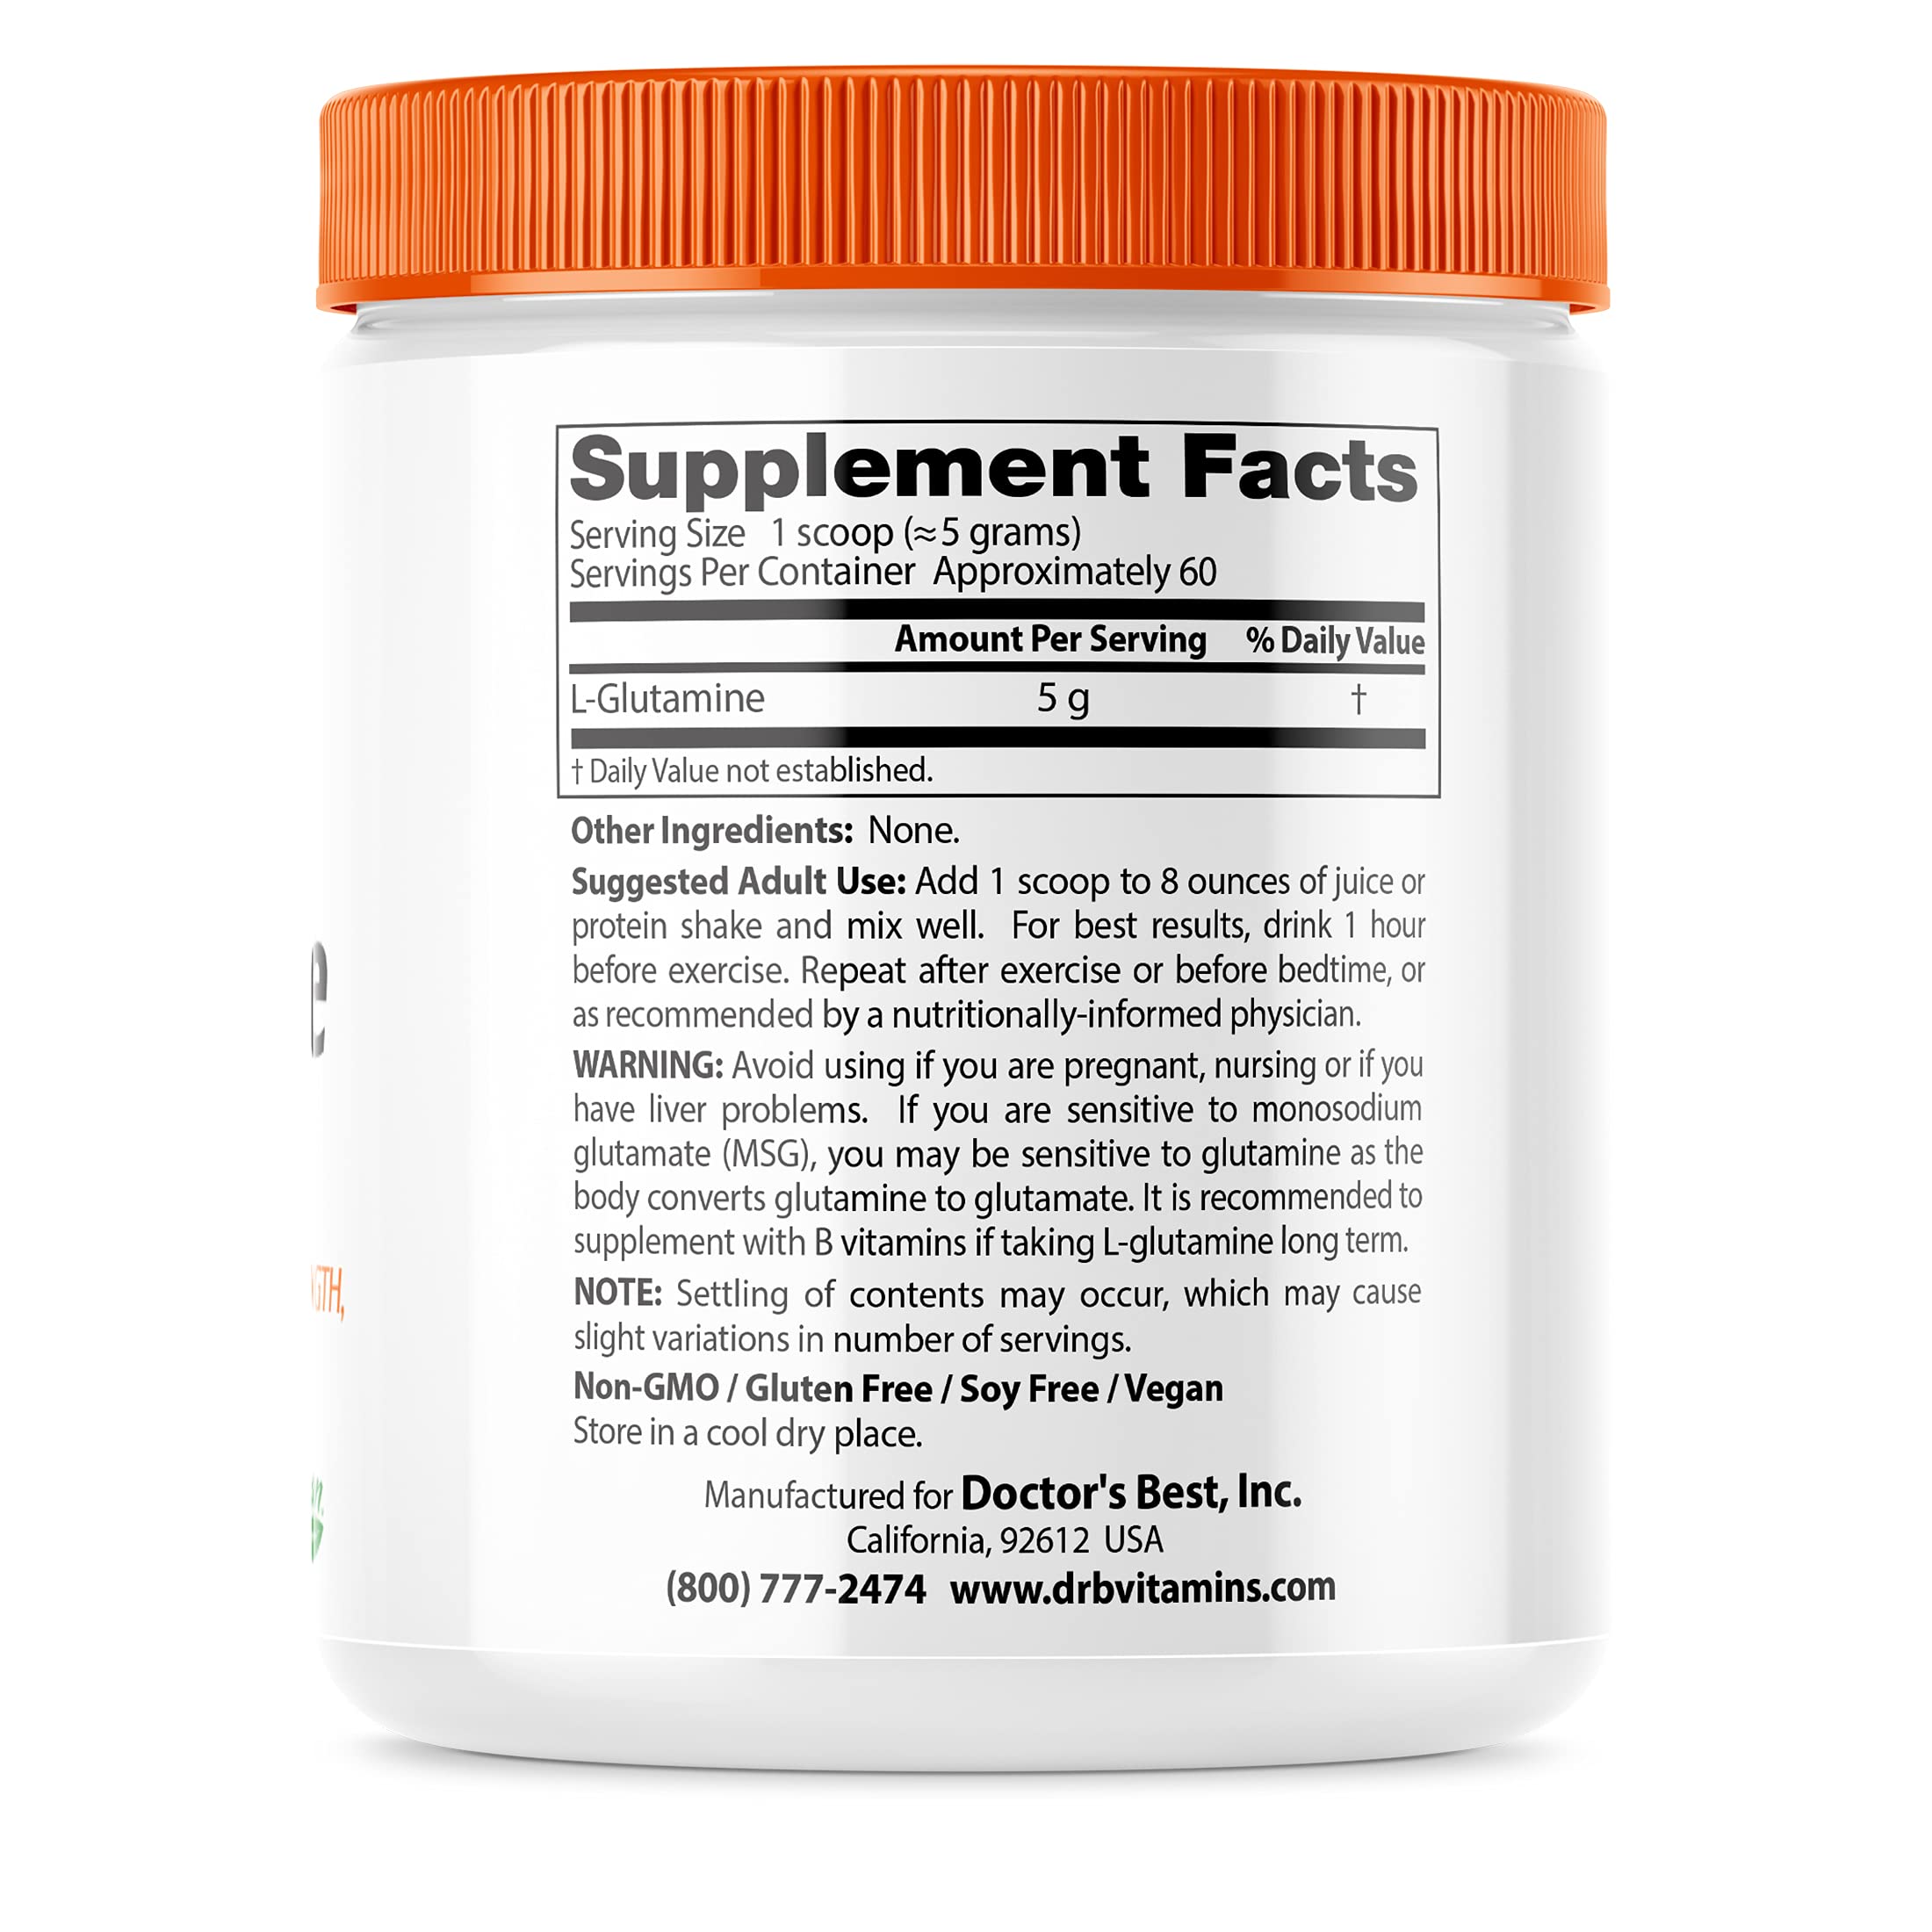 Doctor's Best Pure L-Glutamine Powder, Supports Muscle Mass, Strength & Post-Workout Recovery, Amino Acid, 300g